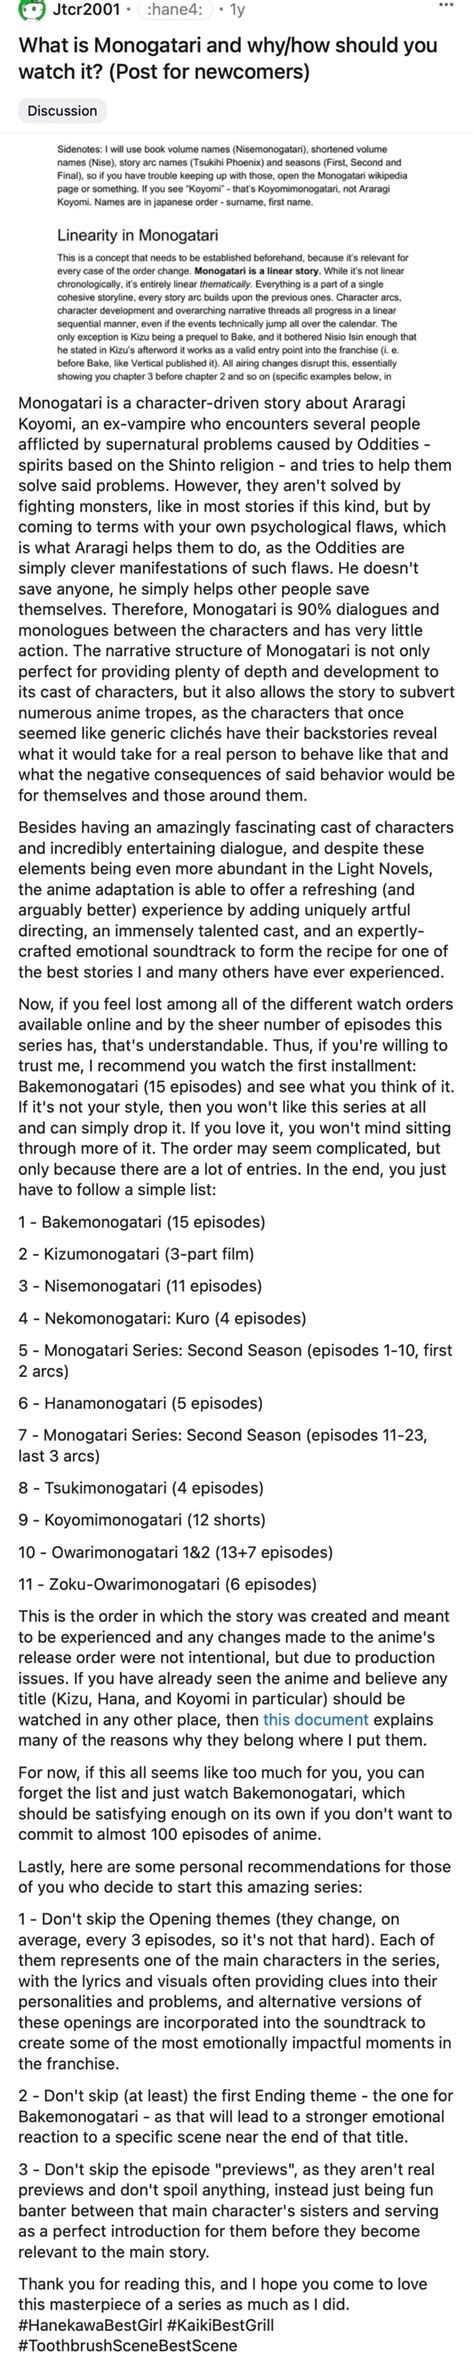 What Is Monogatari And Should You Watch It Post For